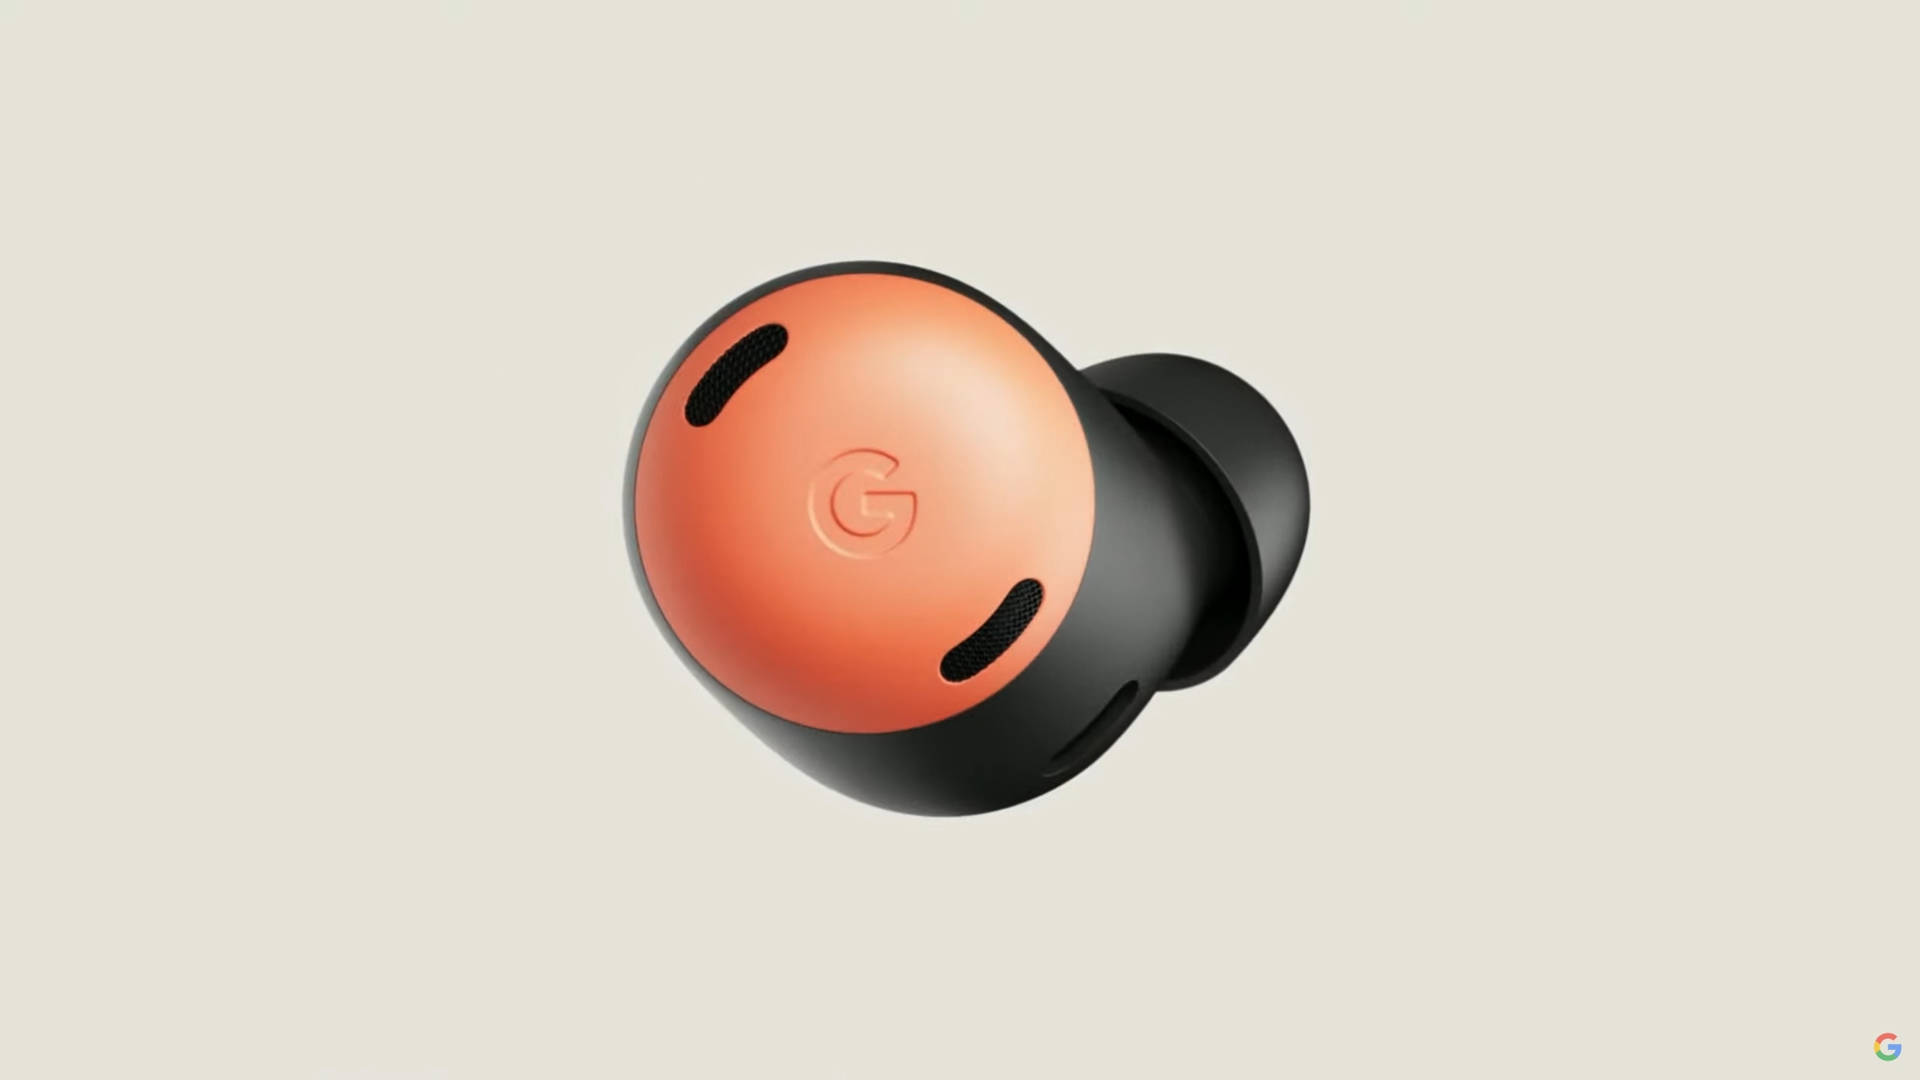 androidauthority.com - Pixel Buds Pro will have wireless charging, but don't expect a fast charge